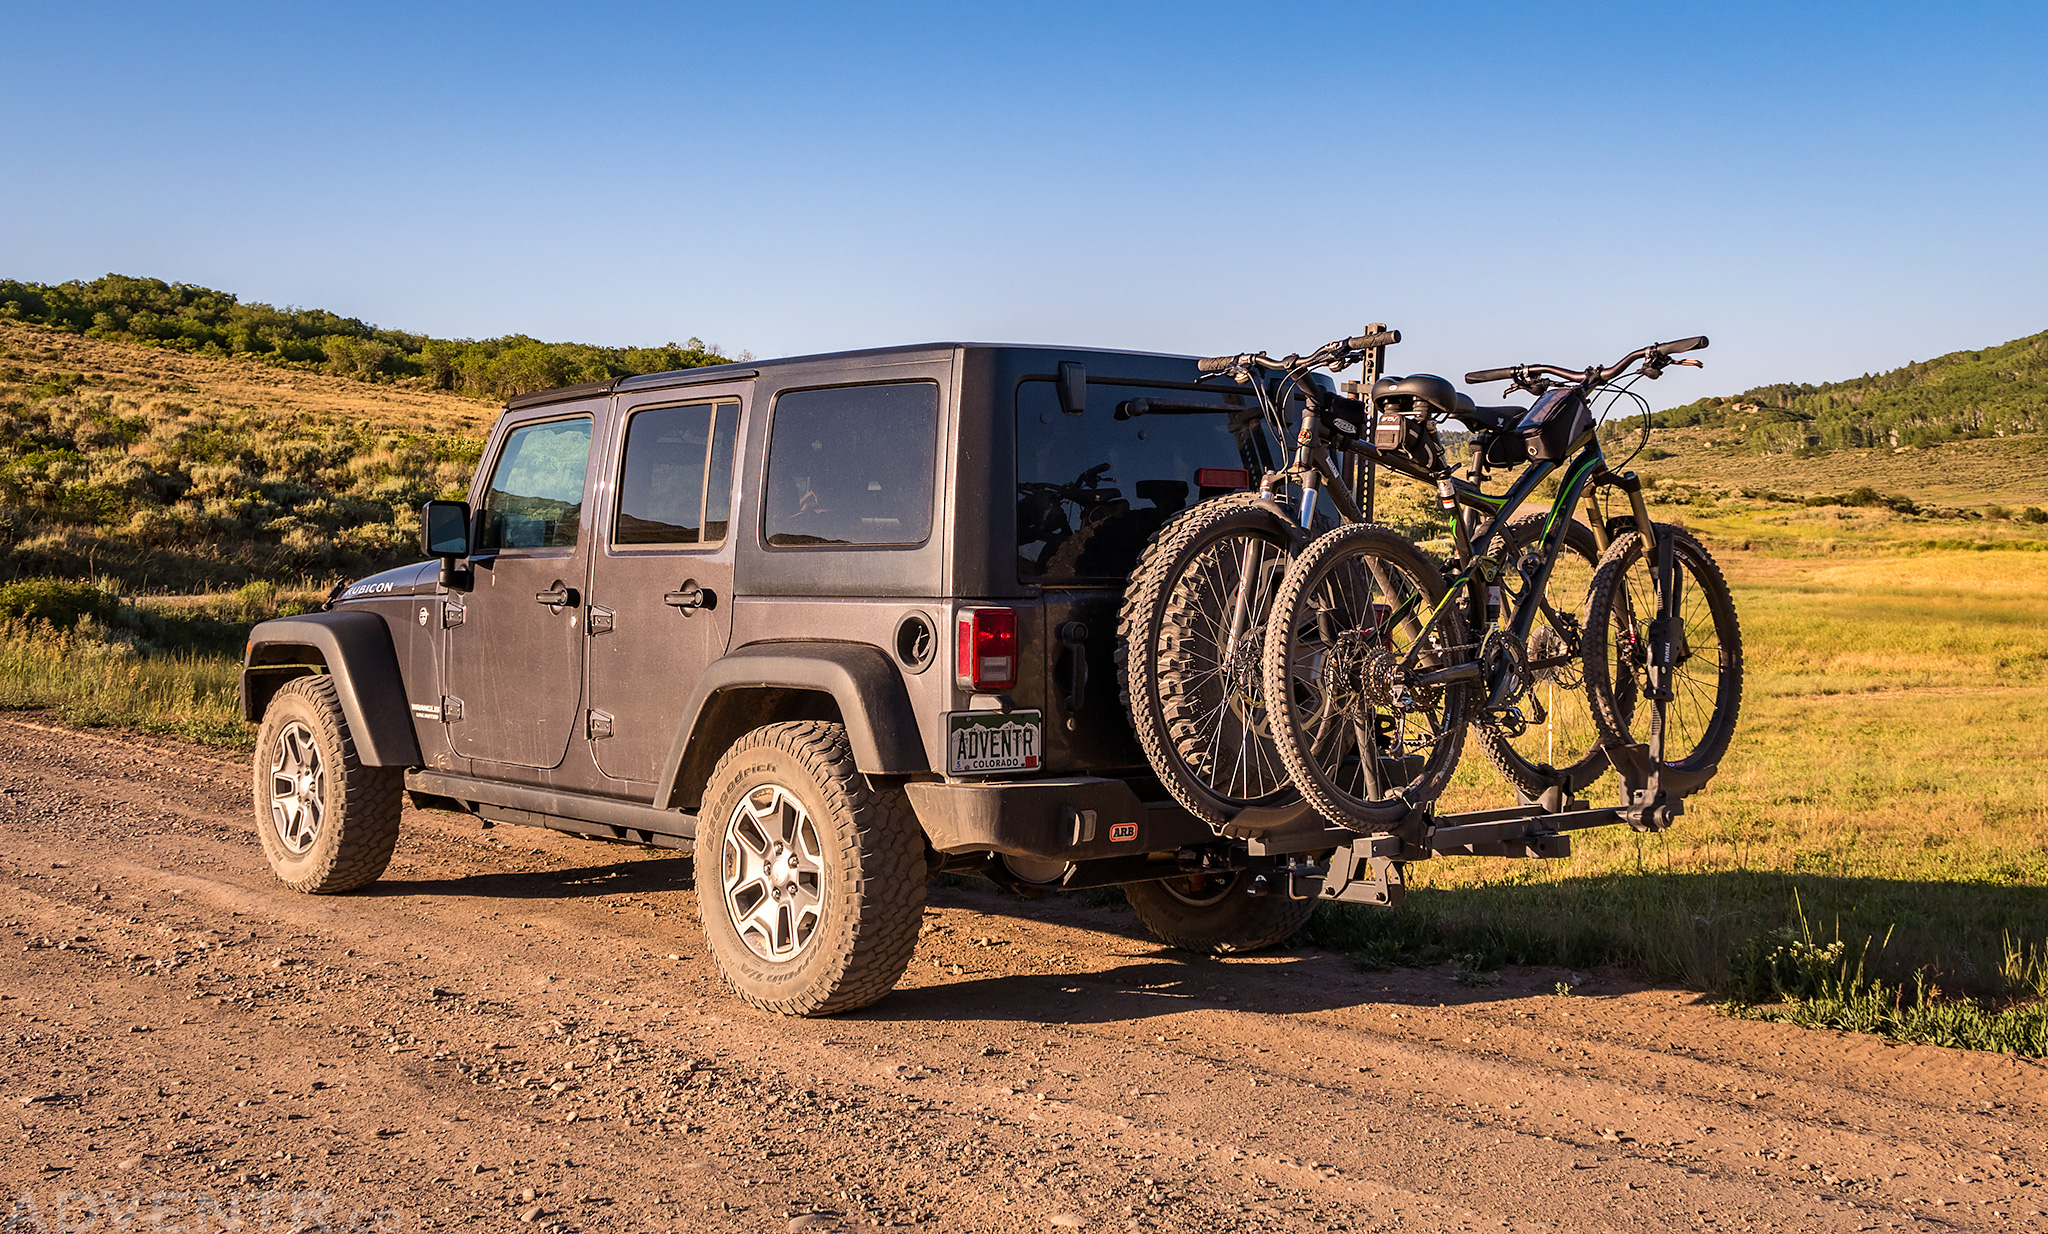 6. Top Recommended Bike Racks for a Jeep Wrangler